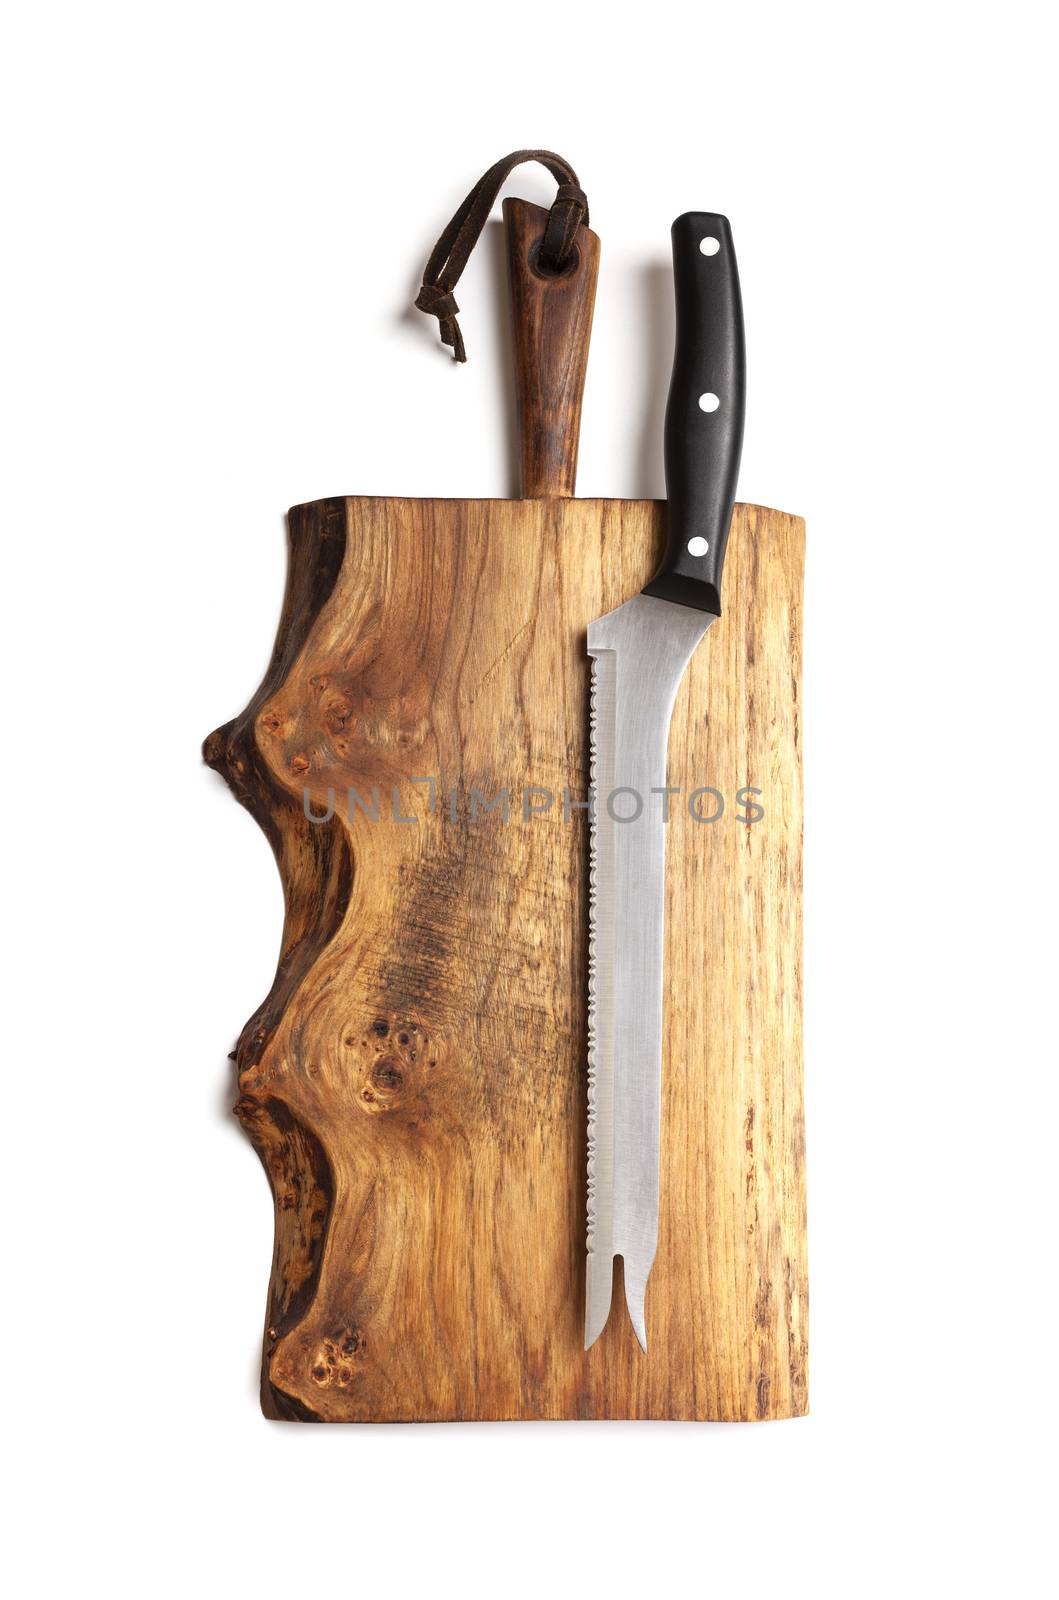 Knife Serrated for kitchen on old wooden cutting Board. Isolated on white background